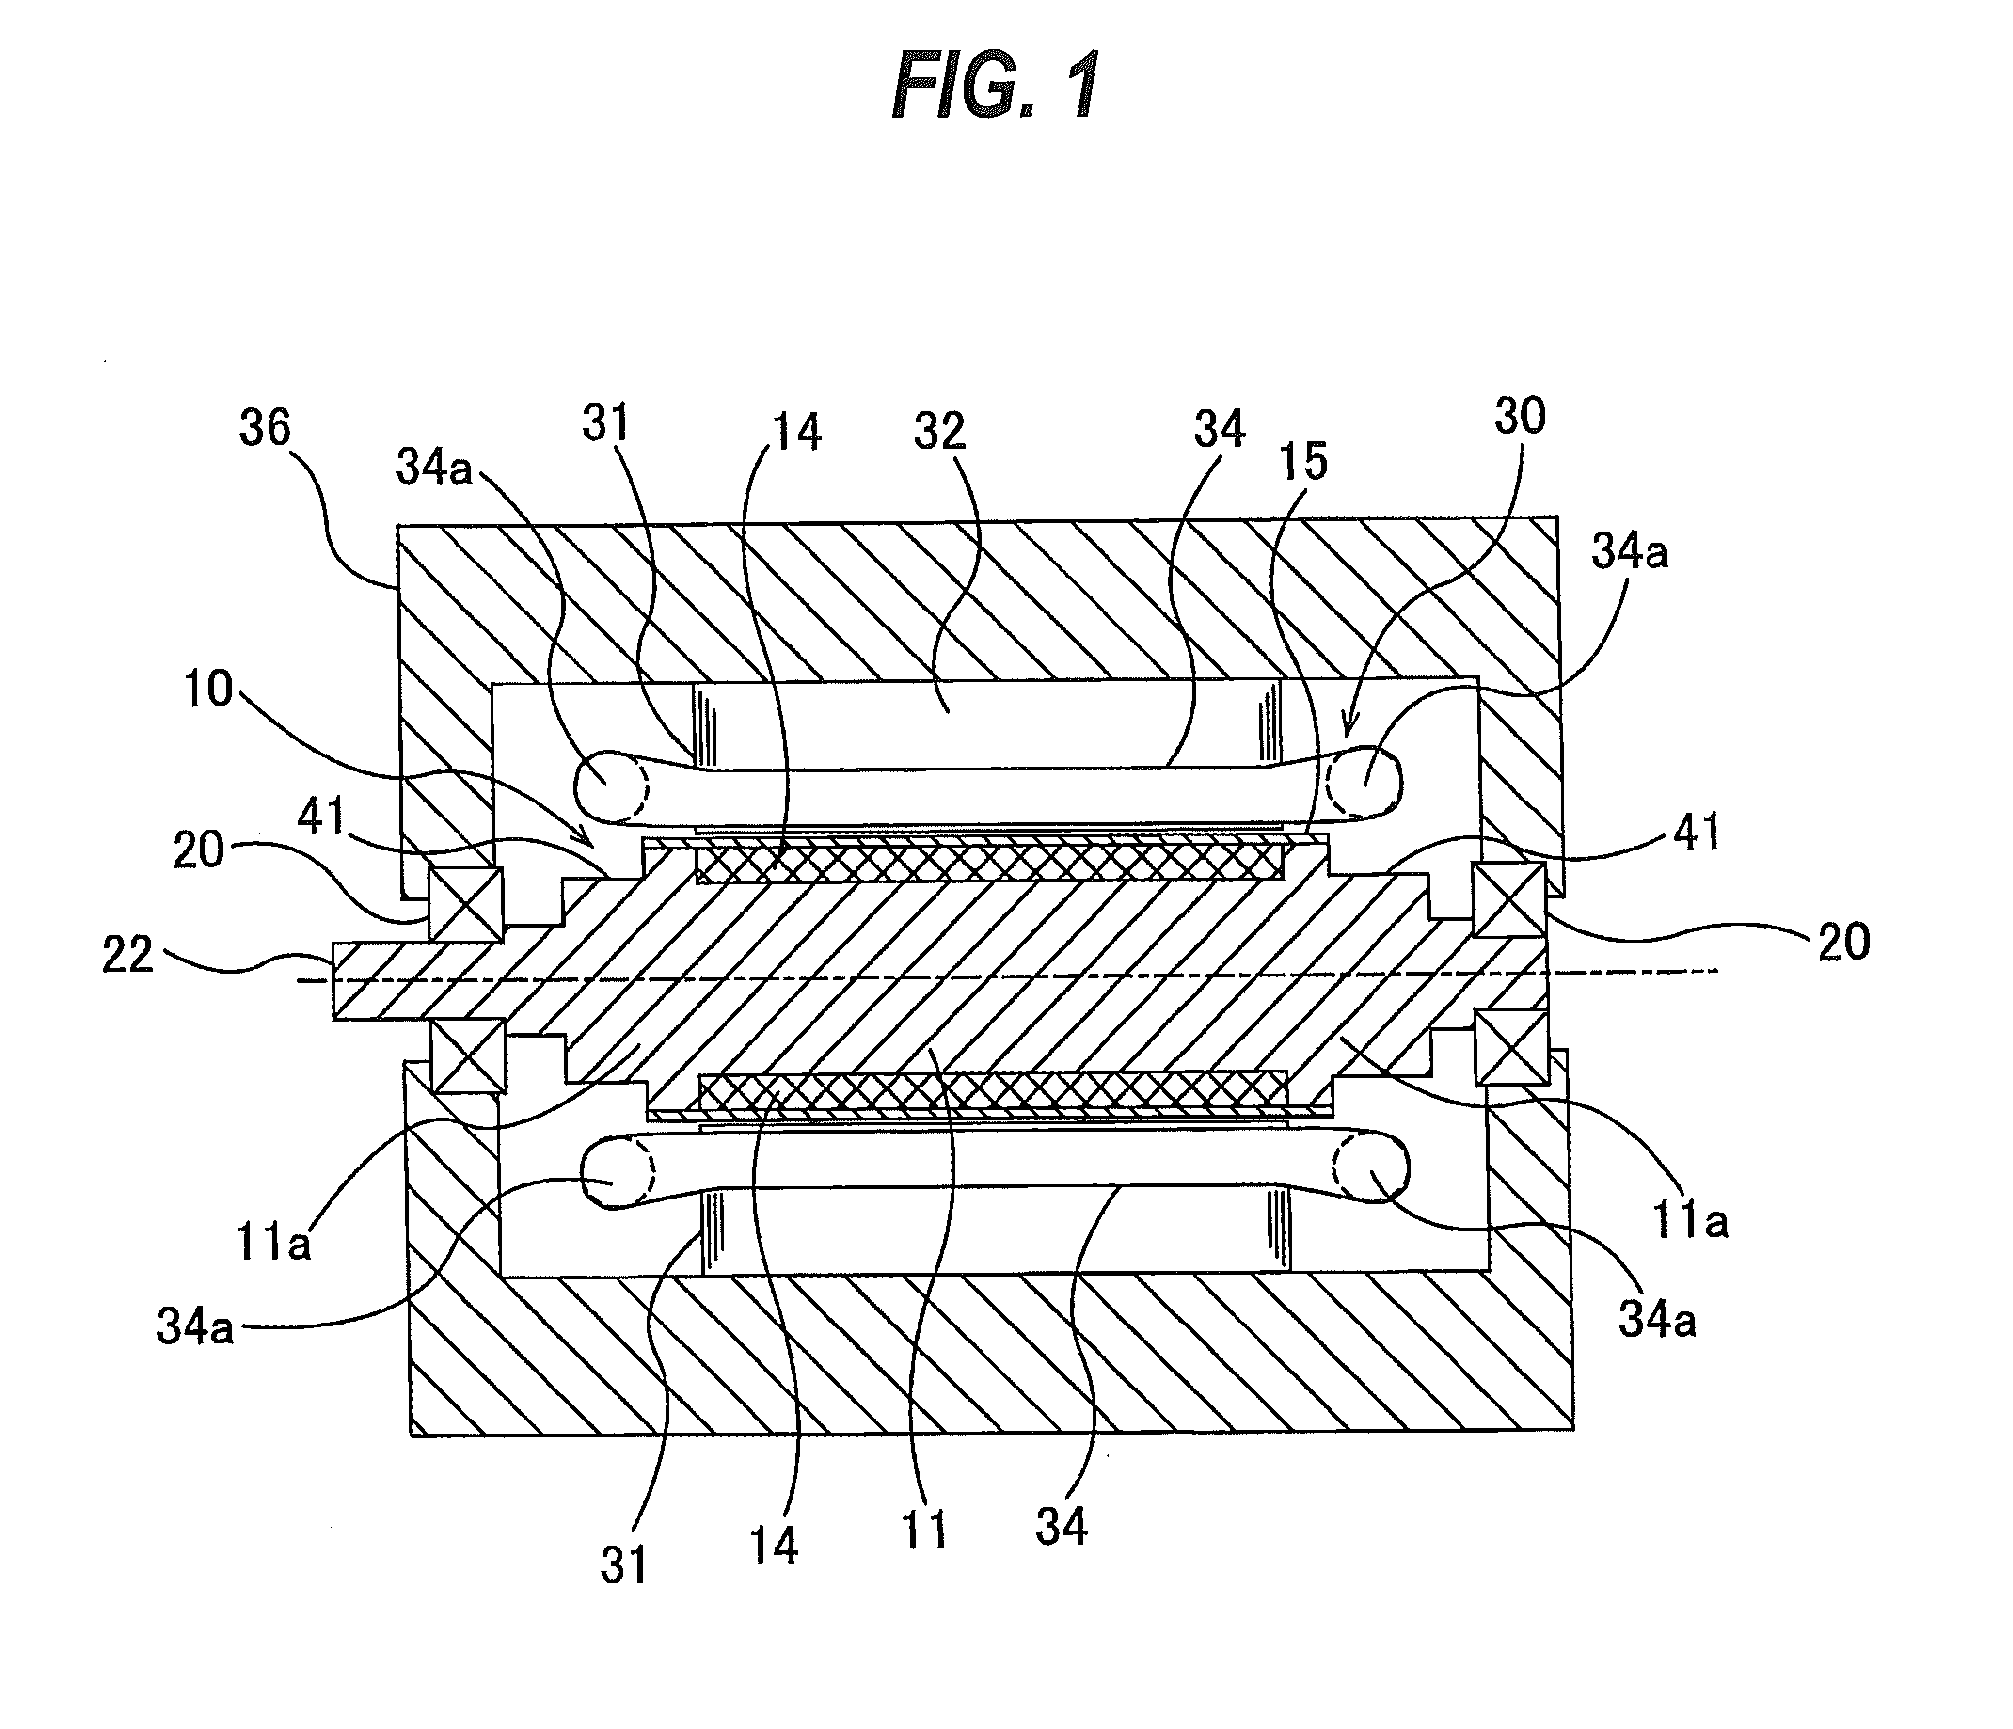 Rotary electrical machine having permanent magnet rotor